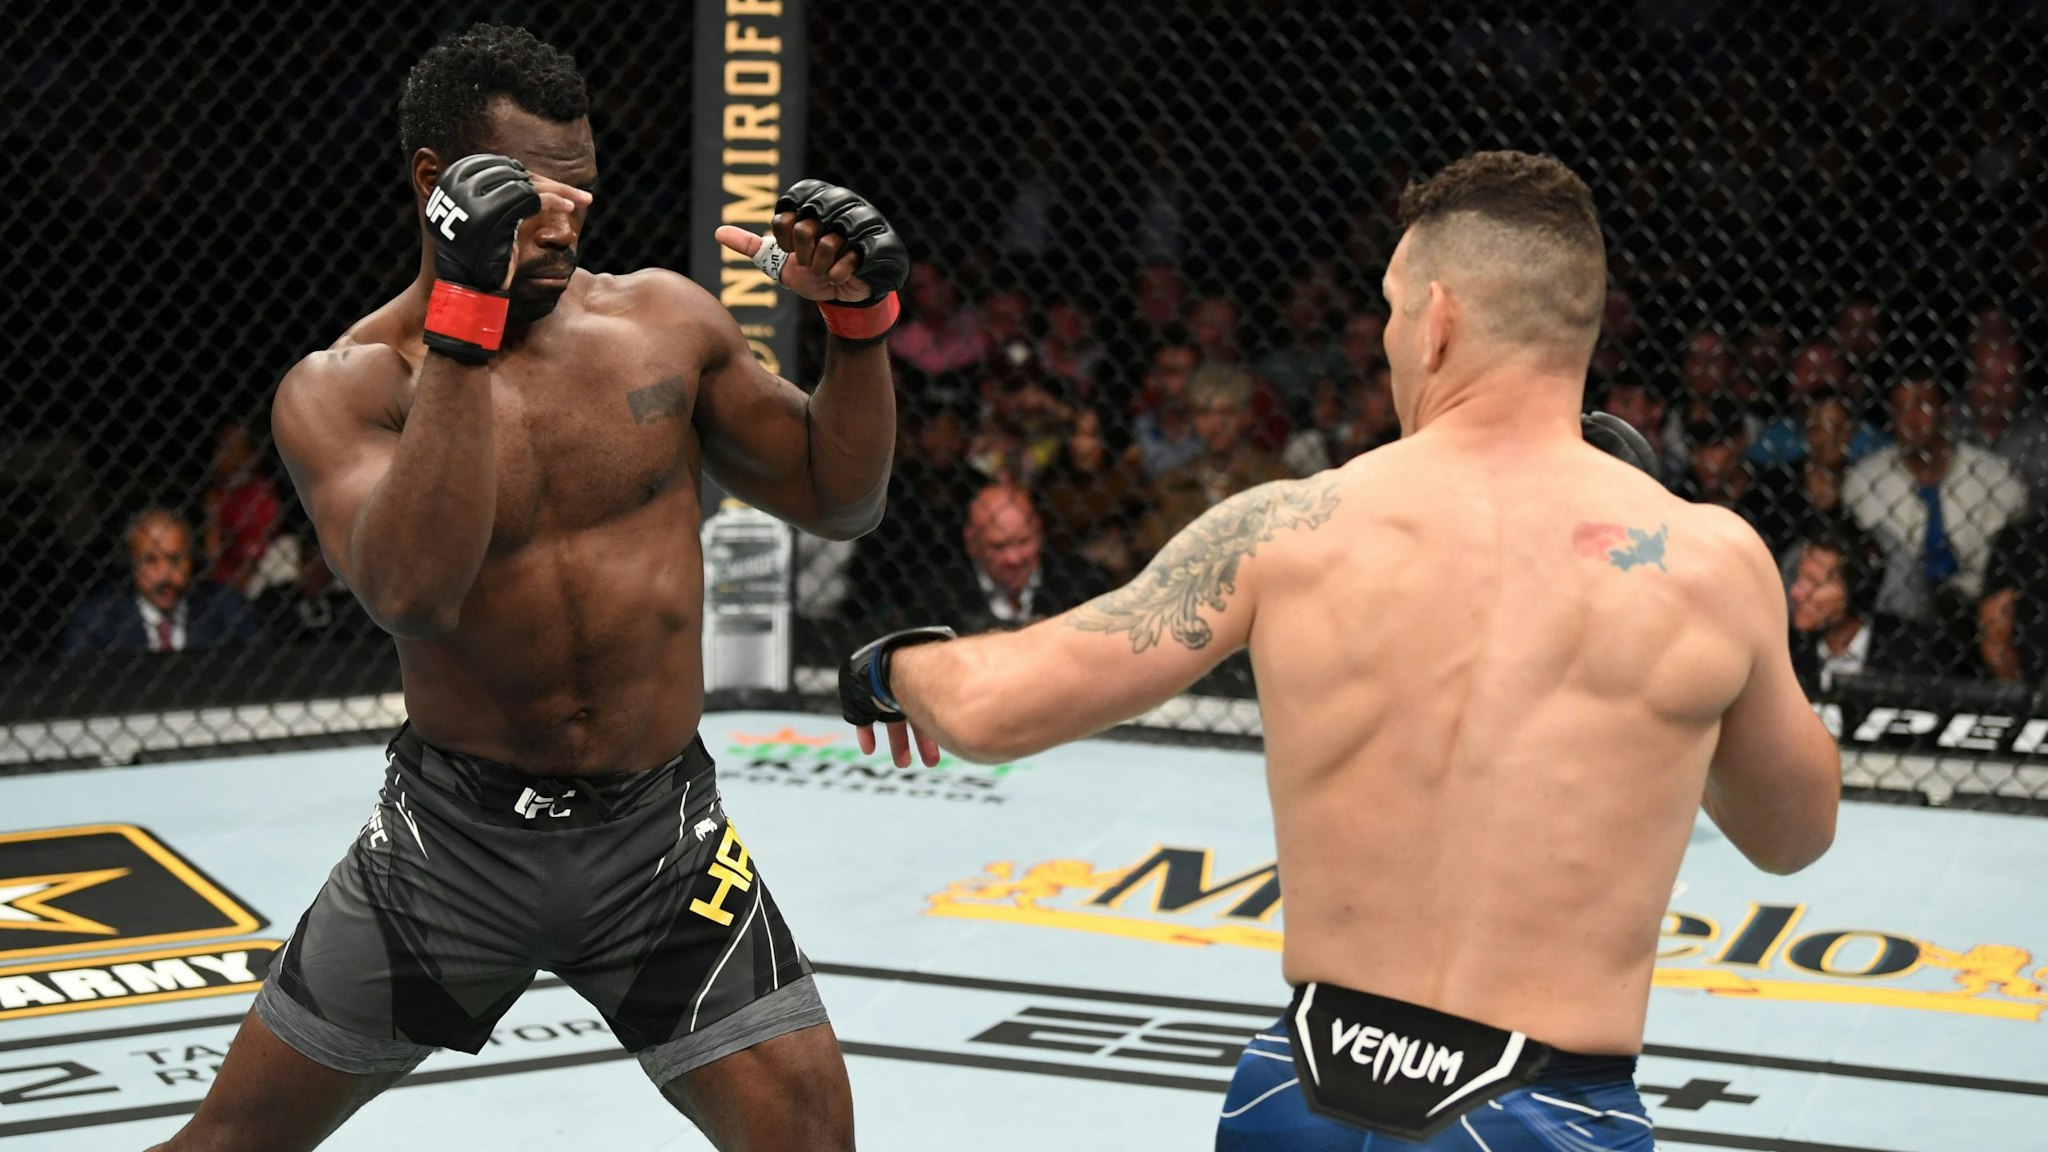 JACKSONVILLE, FLORIDA - APRIL 24: (L-R) Uriah Hall of Jamaica and Chris Weidman face each other in their middleweight bout during the UFC 261 event at VyStar Veterans Memorial Arena on April 24, 2021 in Jacksonville, Florida.